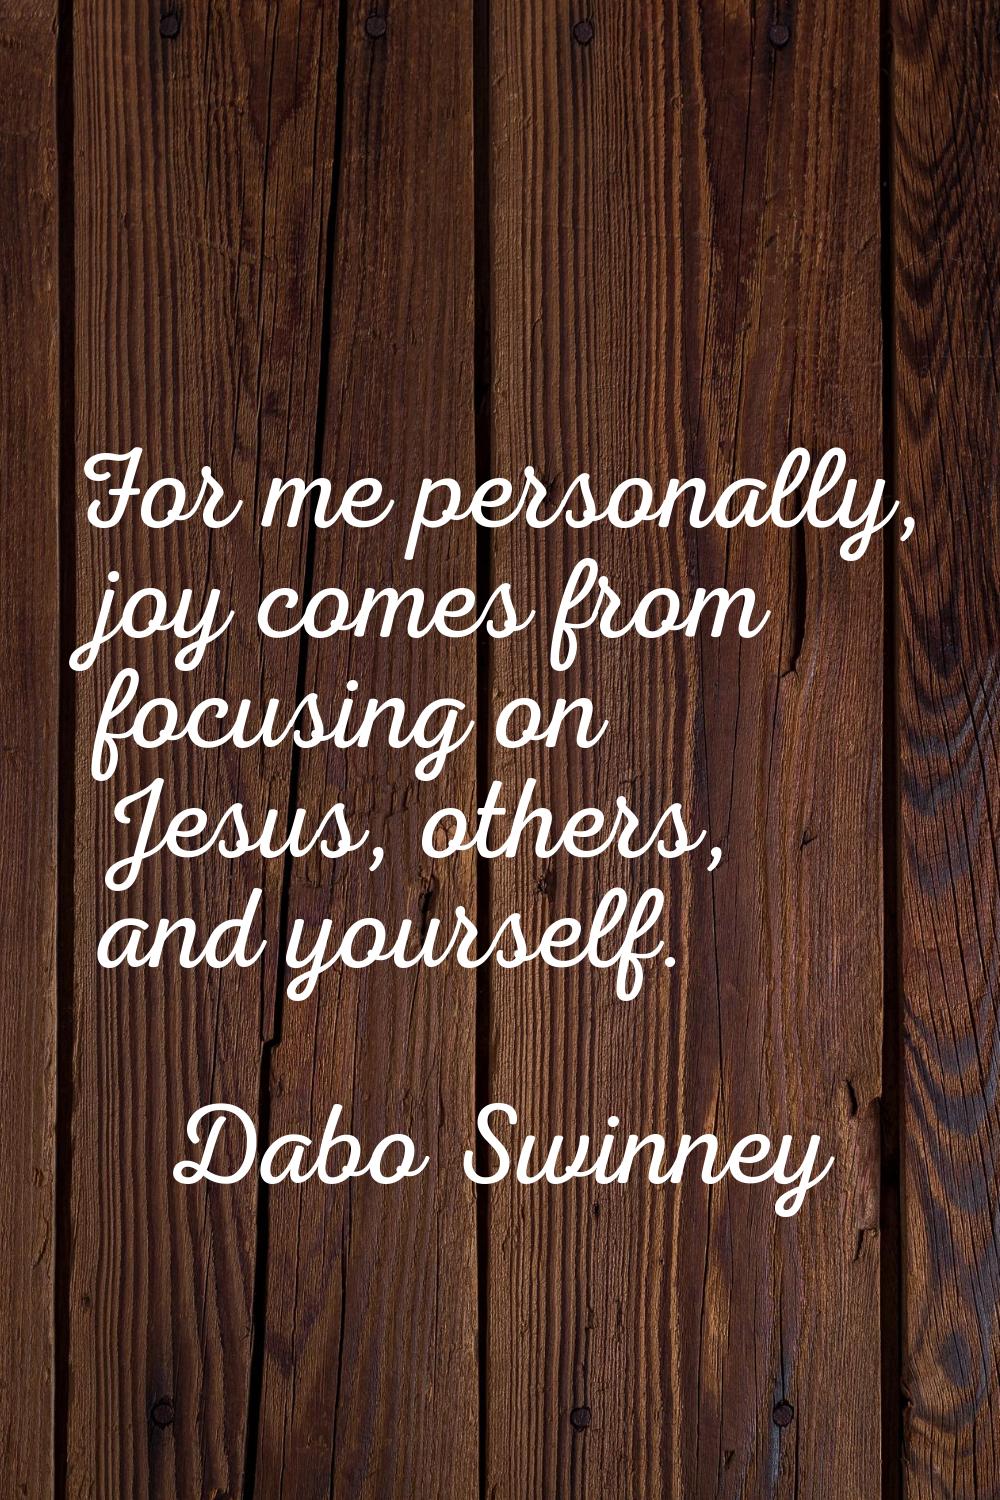 For me personally, joy comes from focusing on Jesus, others, and yourself.